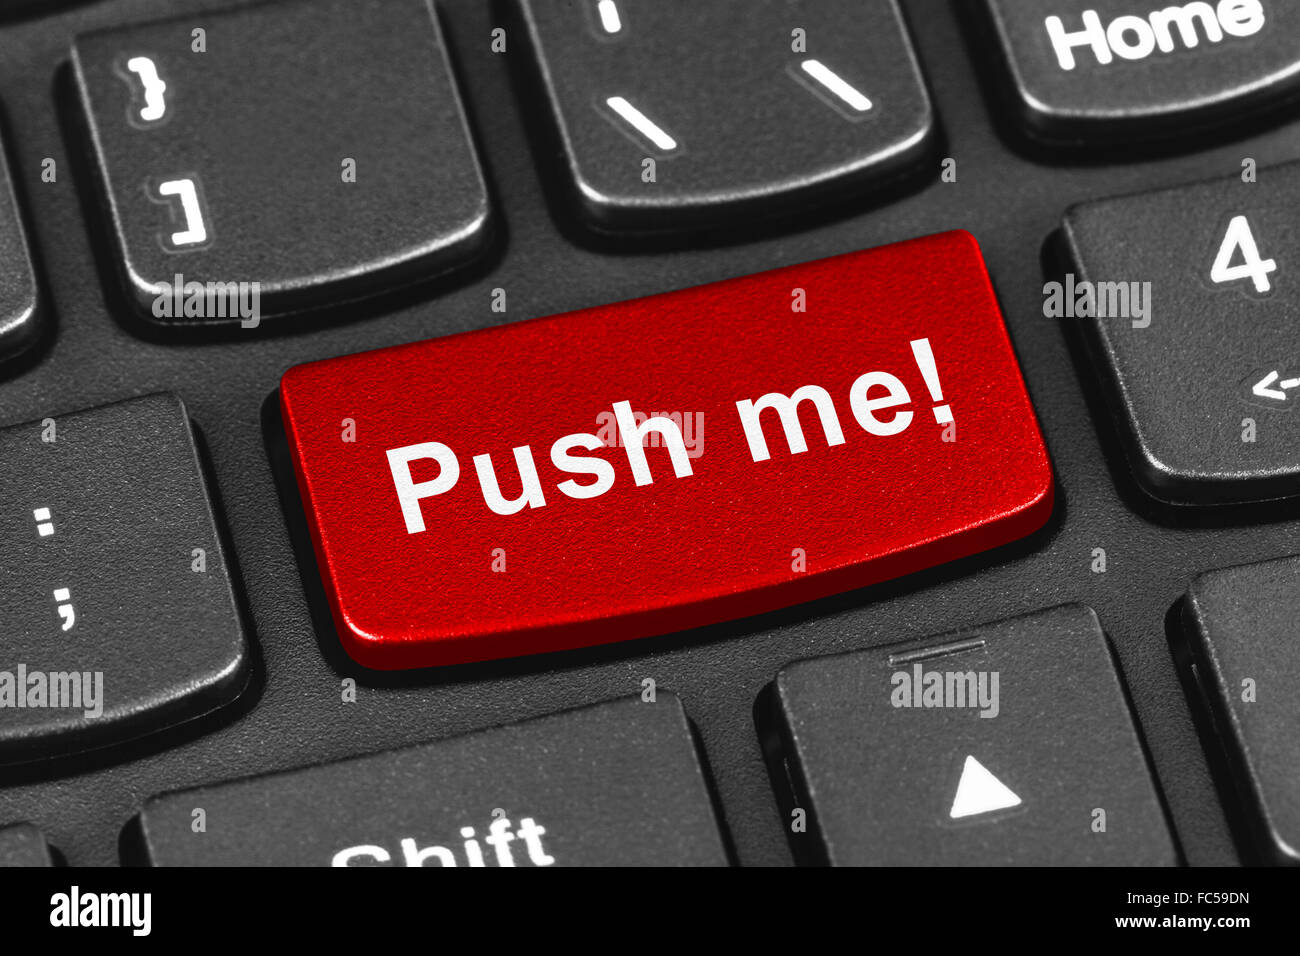 Computer notebook keyboard with Push me key Stock Photo